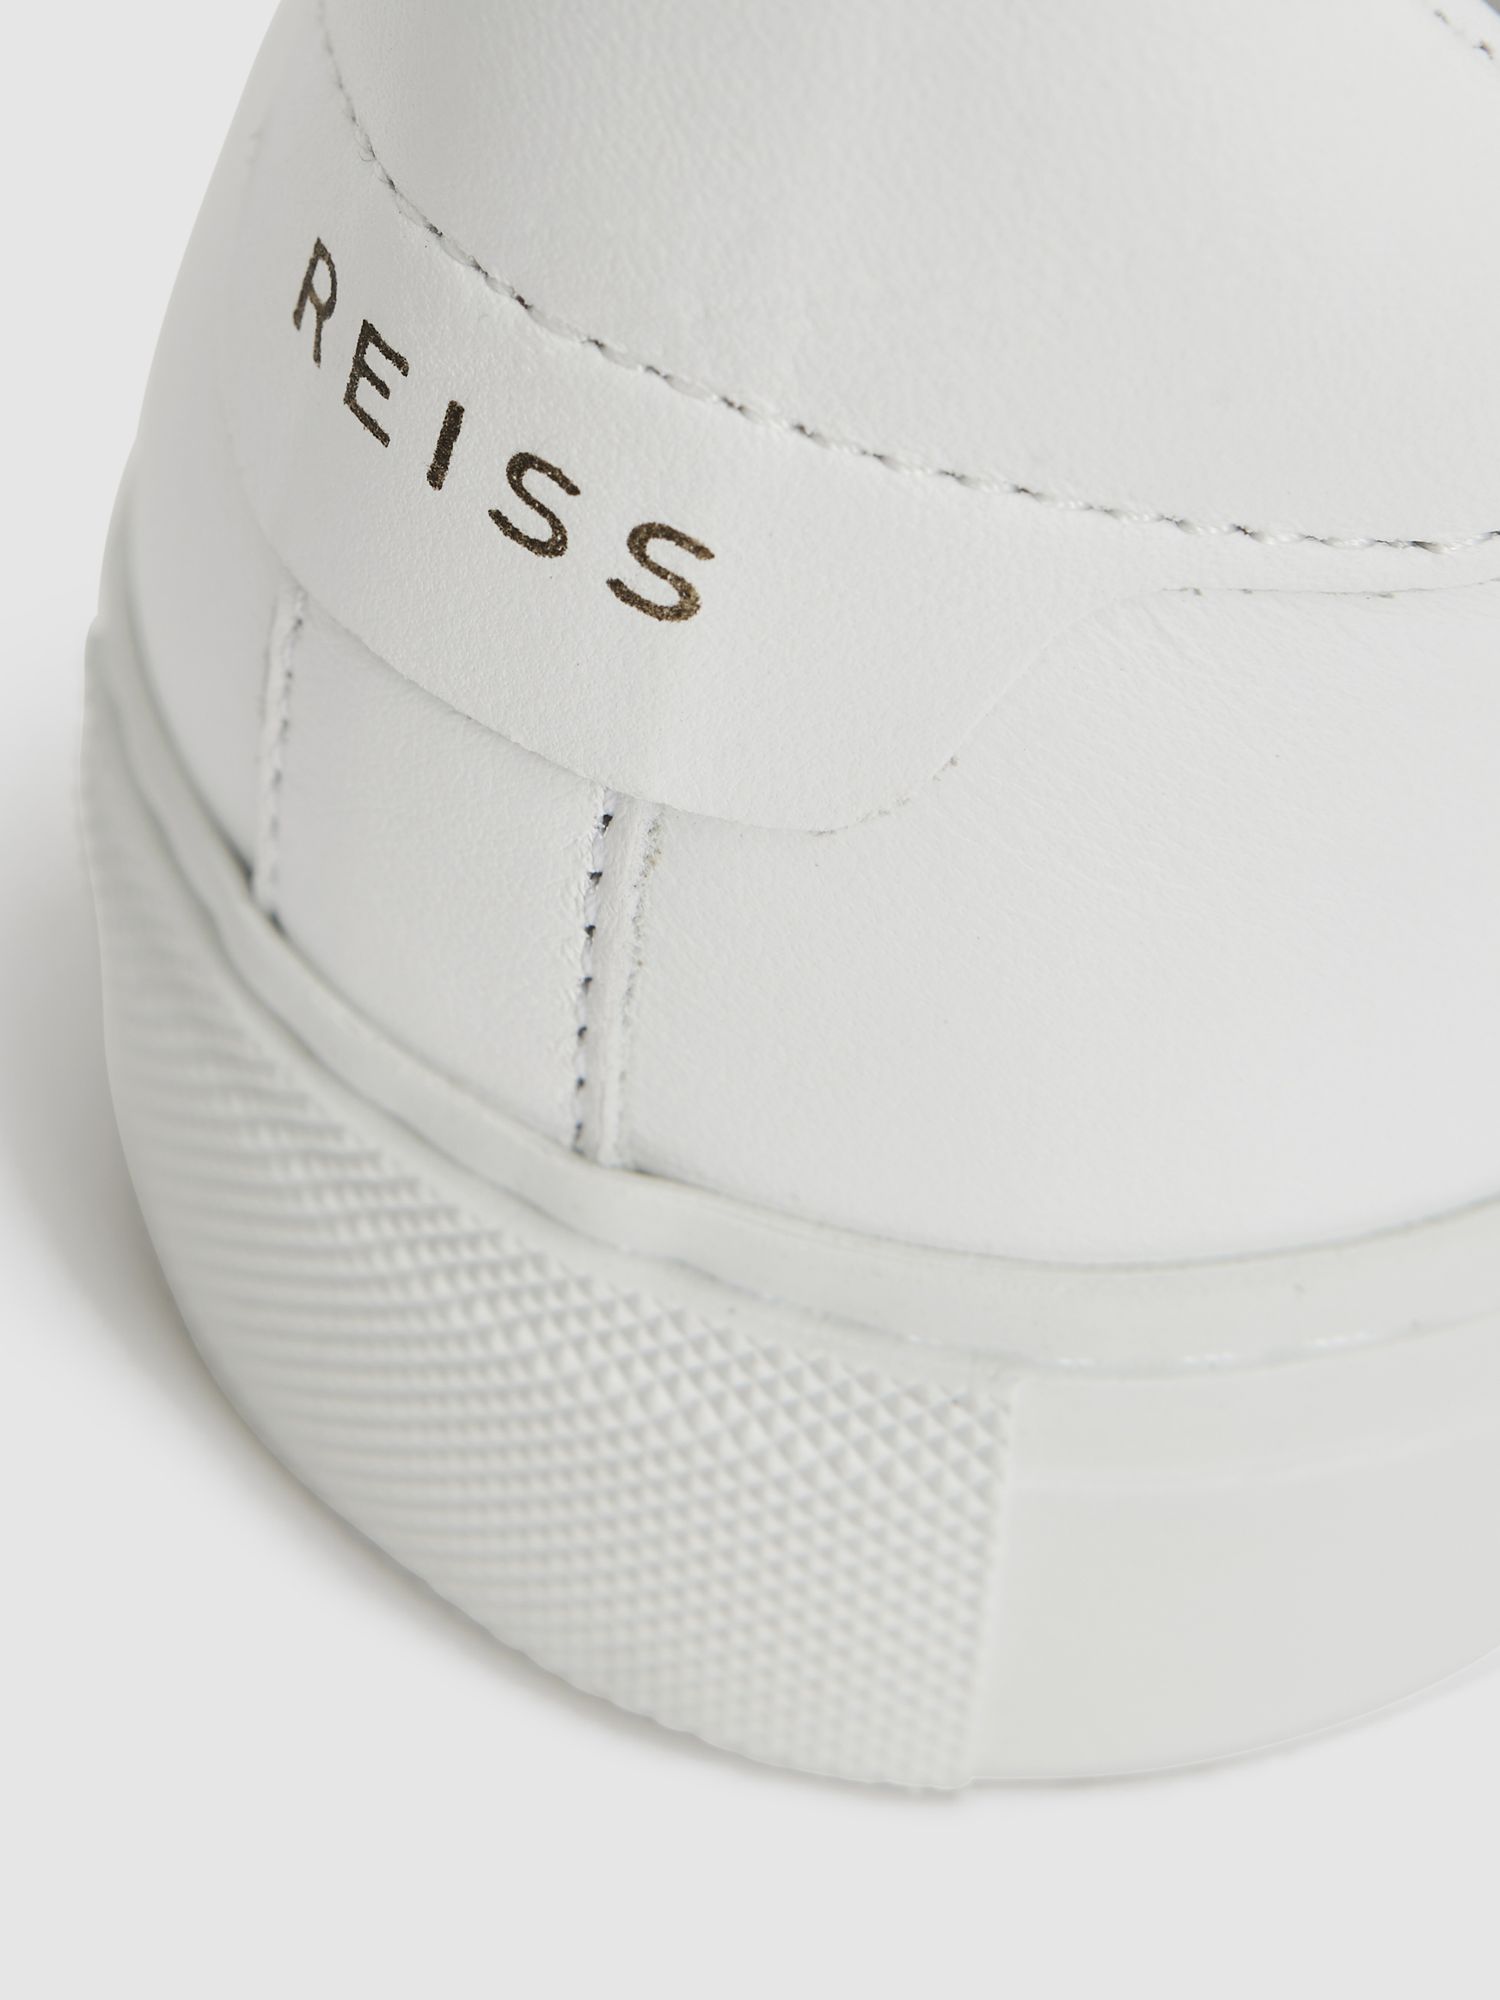 Reiss Finley Low Top Leather Trainers, White at John Lewis & Partners